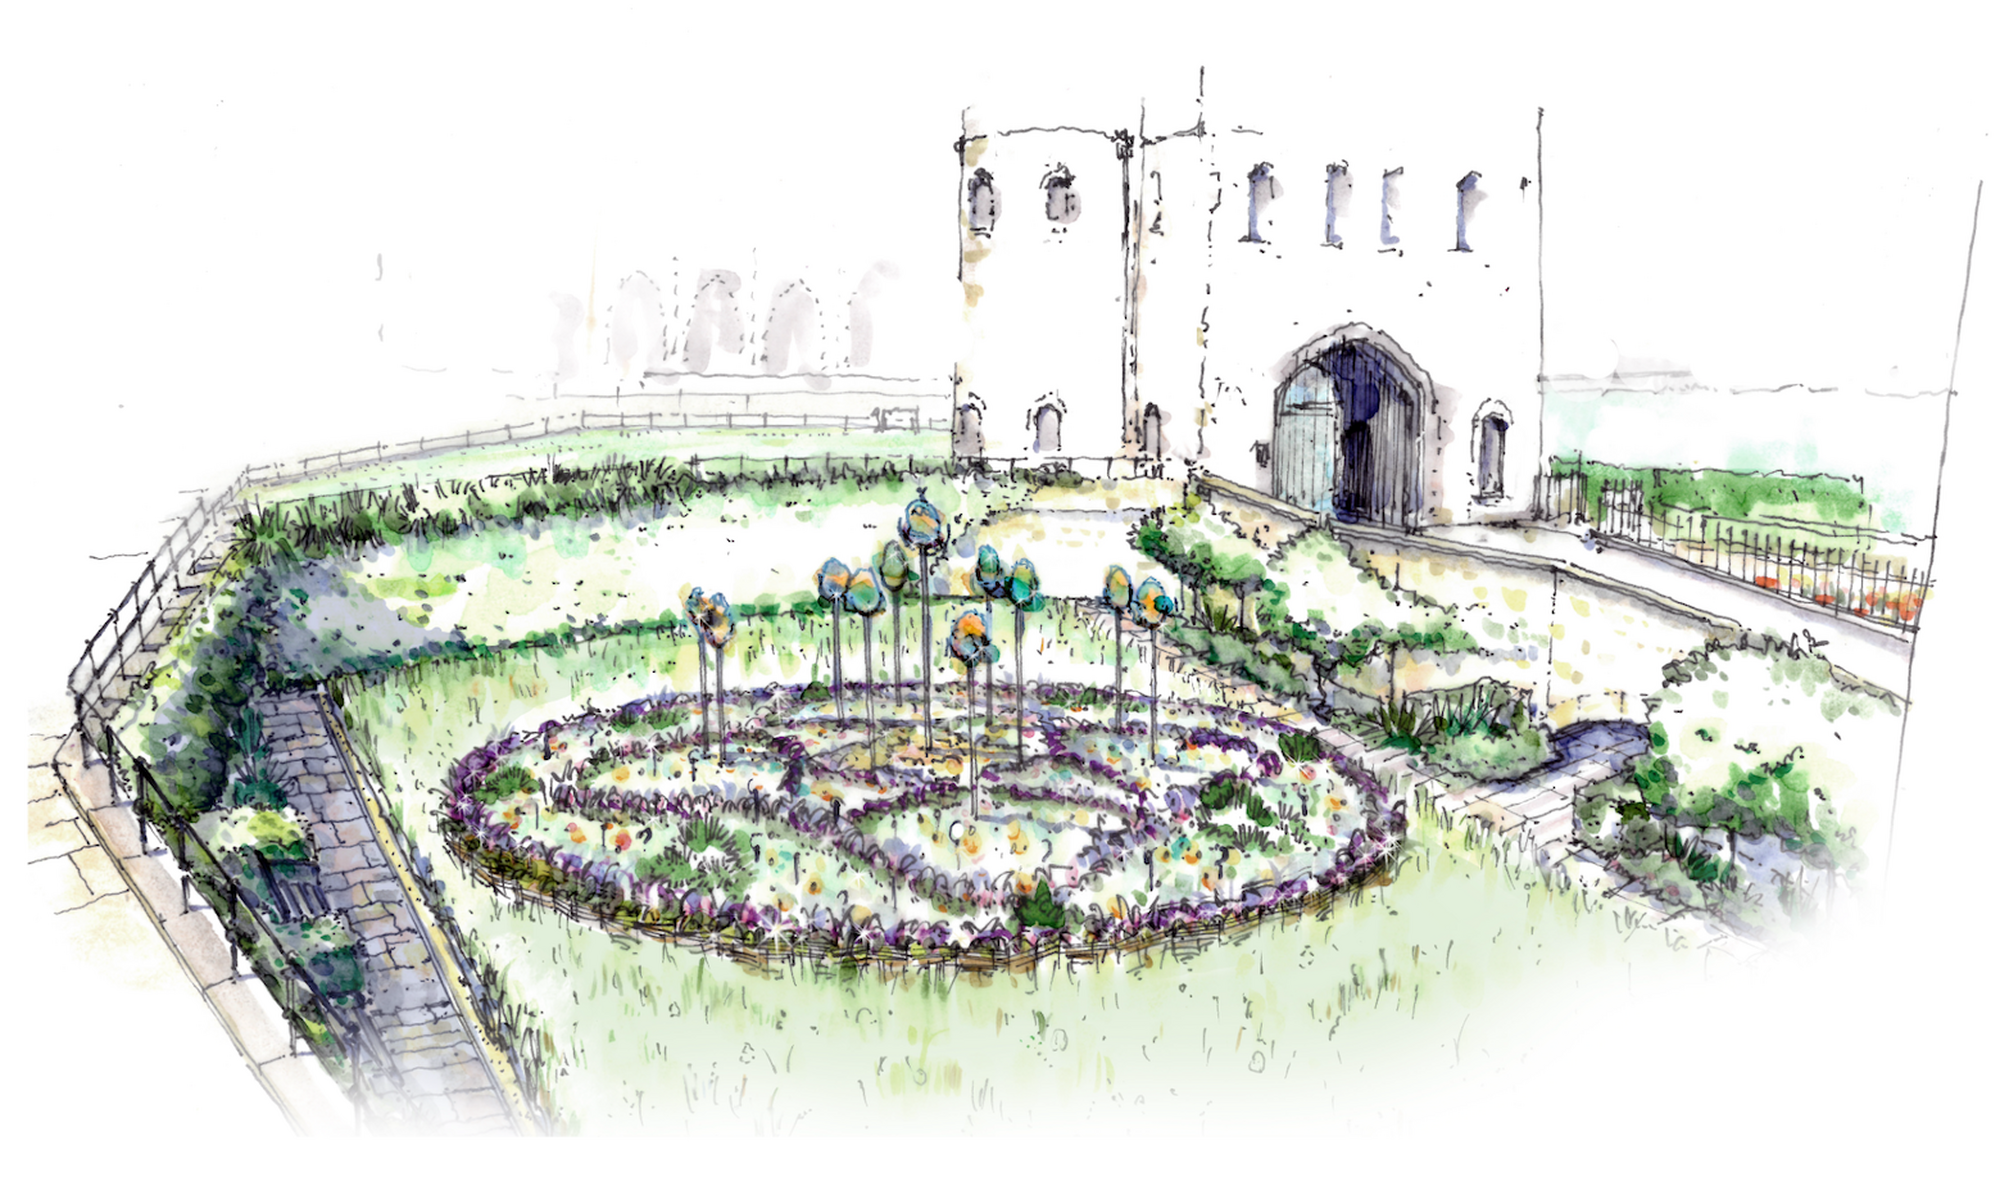 ‘Queen’s Garden’ to be created at Tower of London as part of Superbloom celebration